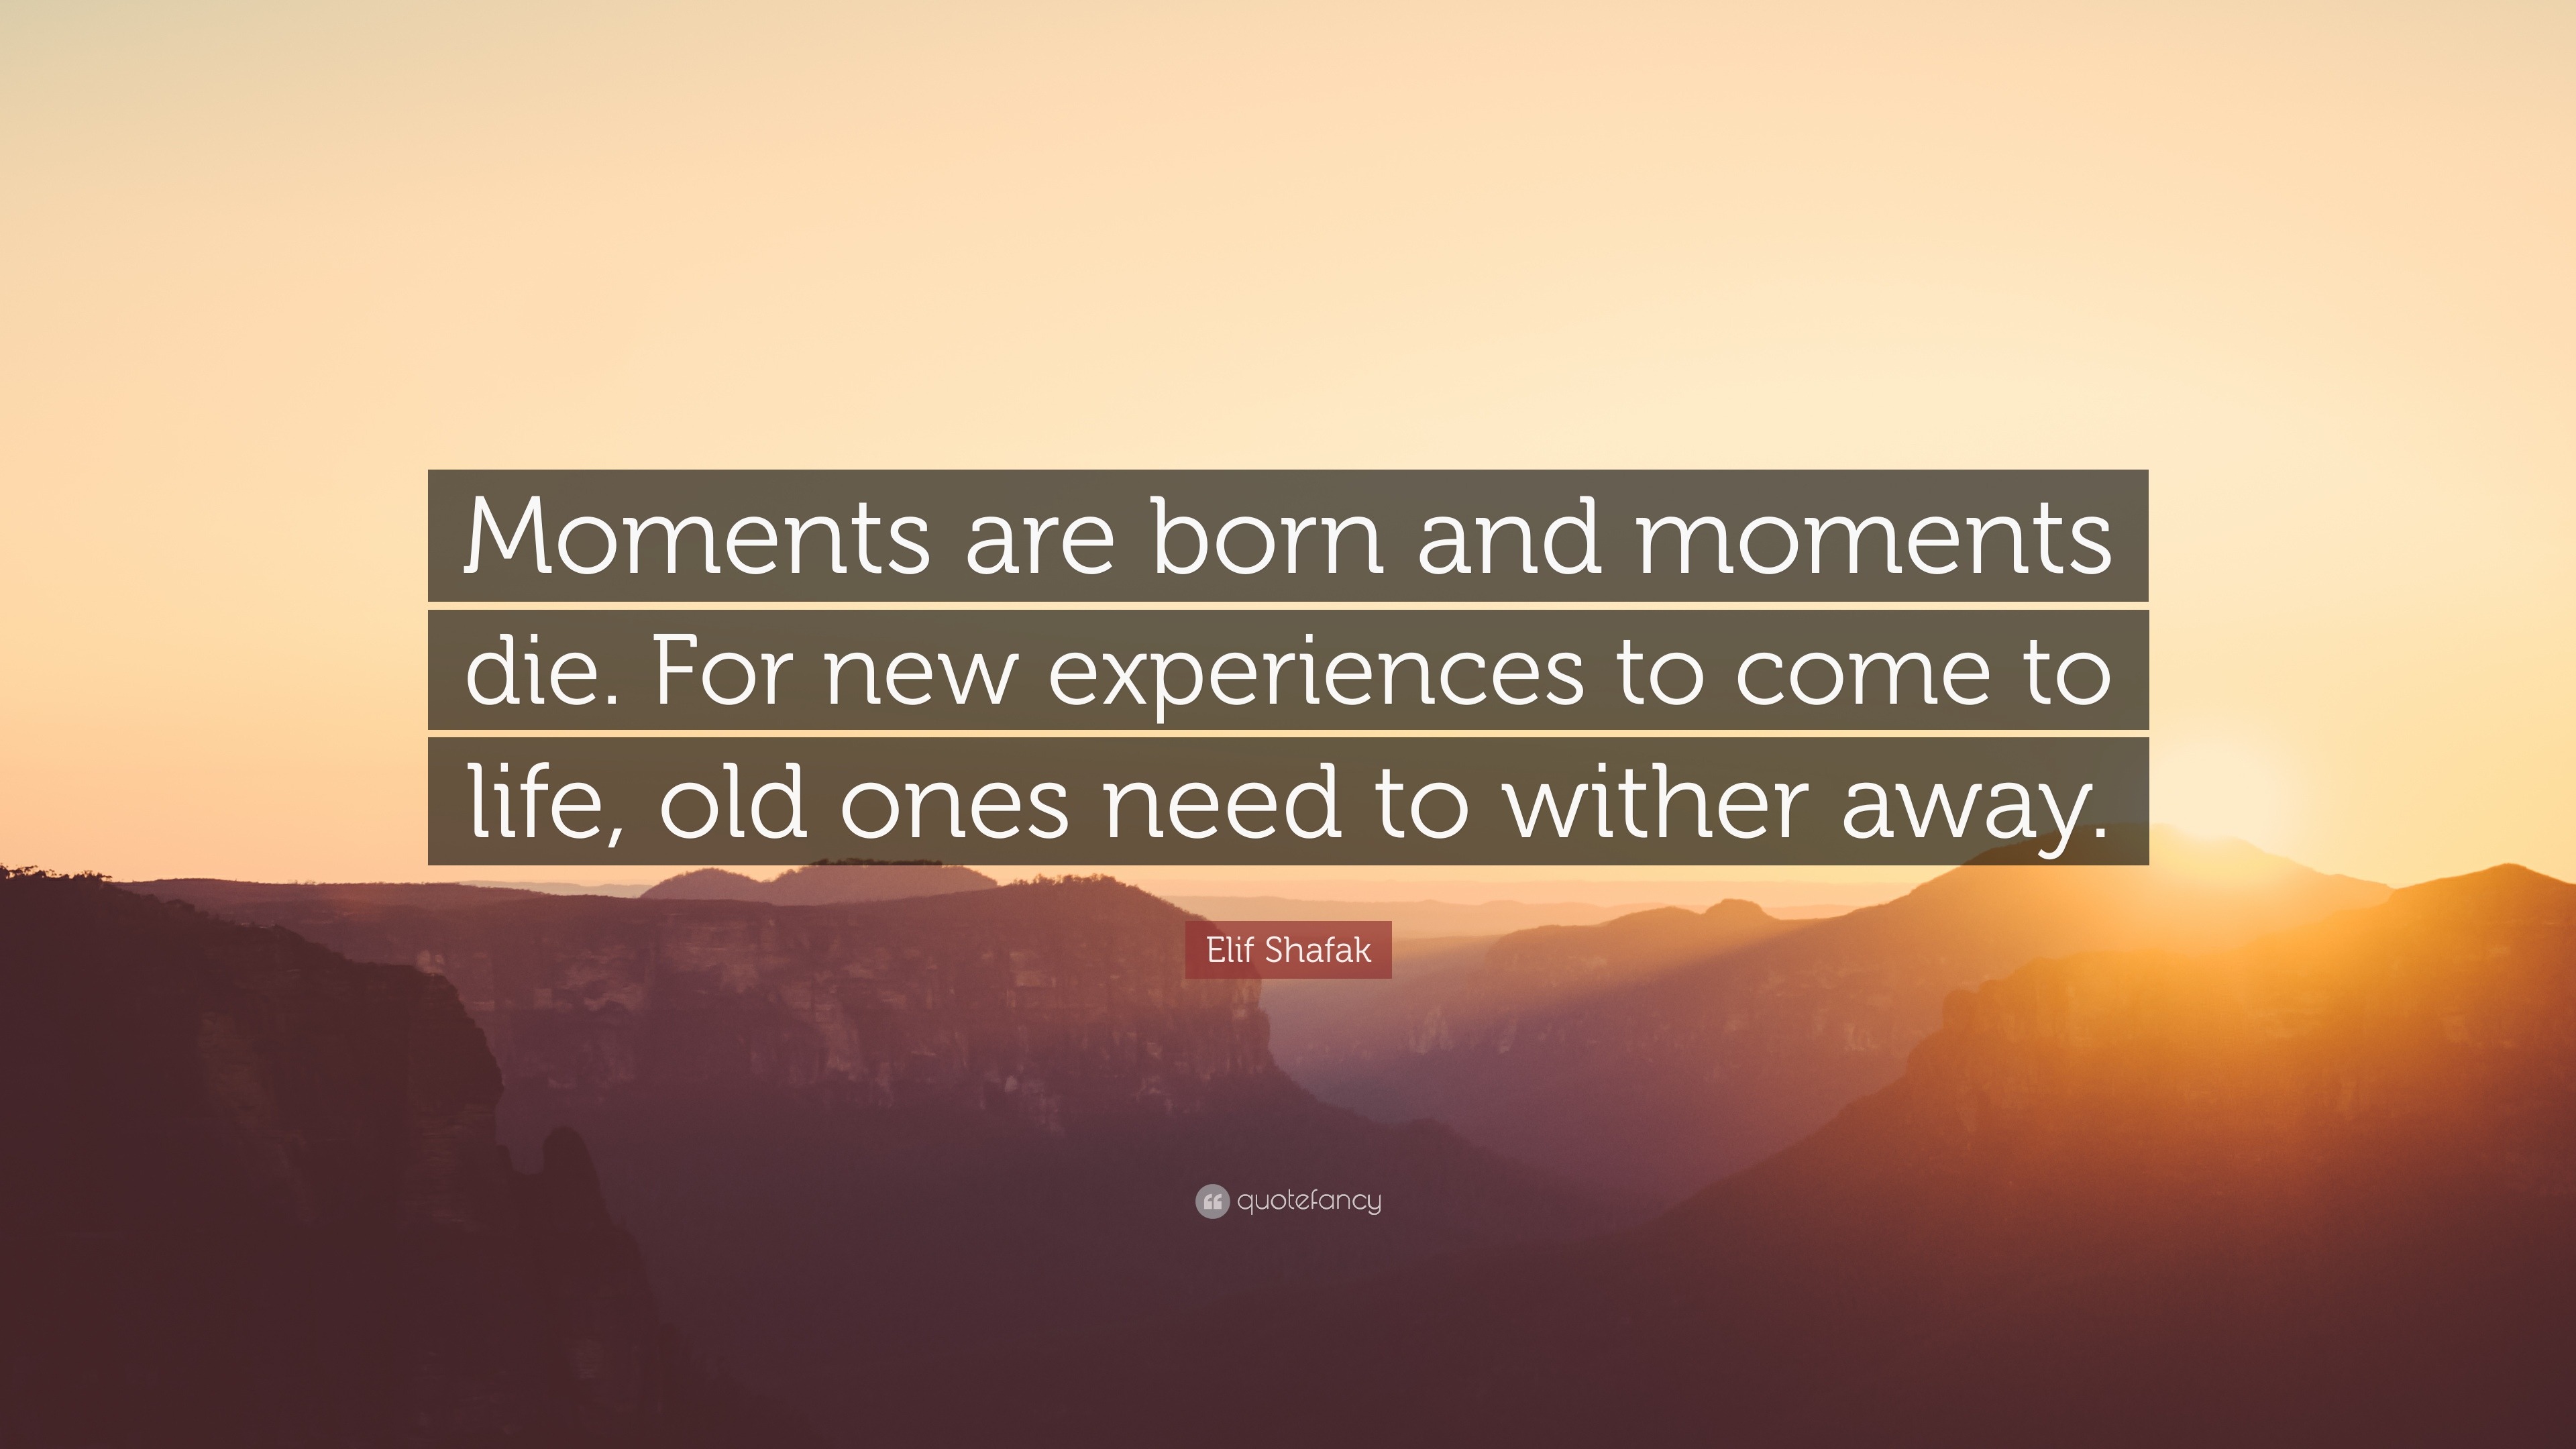 Elif Shafak Quote “Moments are born and moments For new experiences to